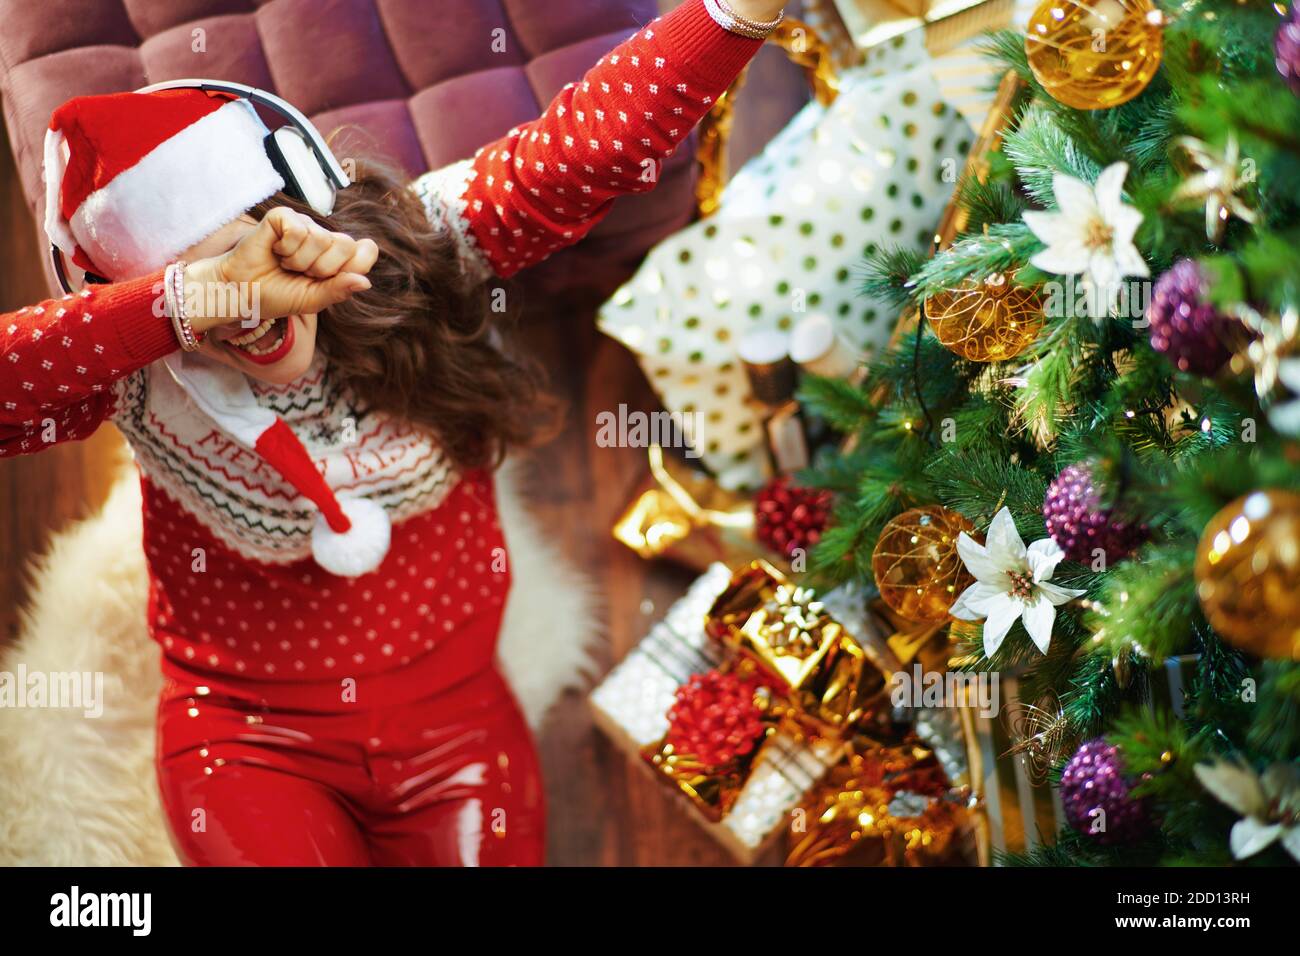 Merry Christmas. Upper view of happy young woman in red sweater and Santa hat listening to the music with headphones and doing dabbing gesture near Ch Stock Photo